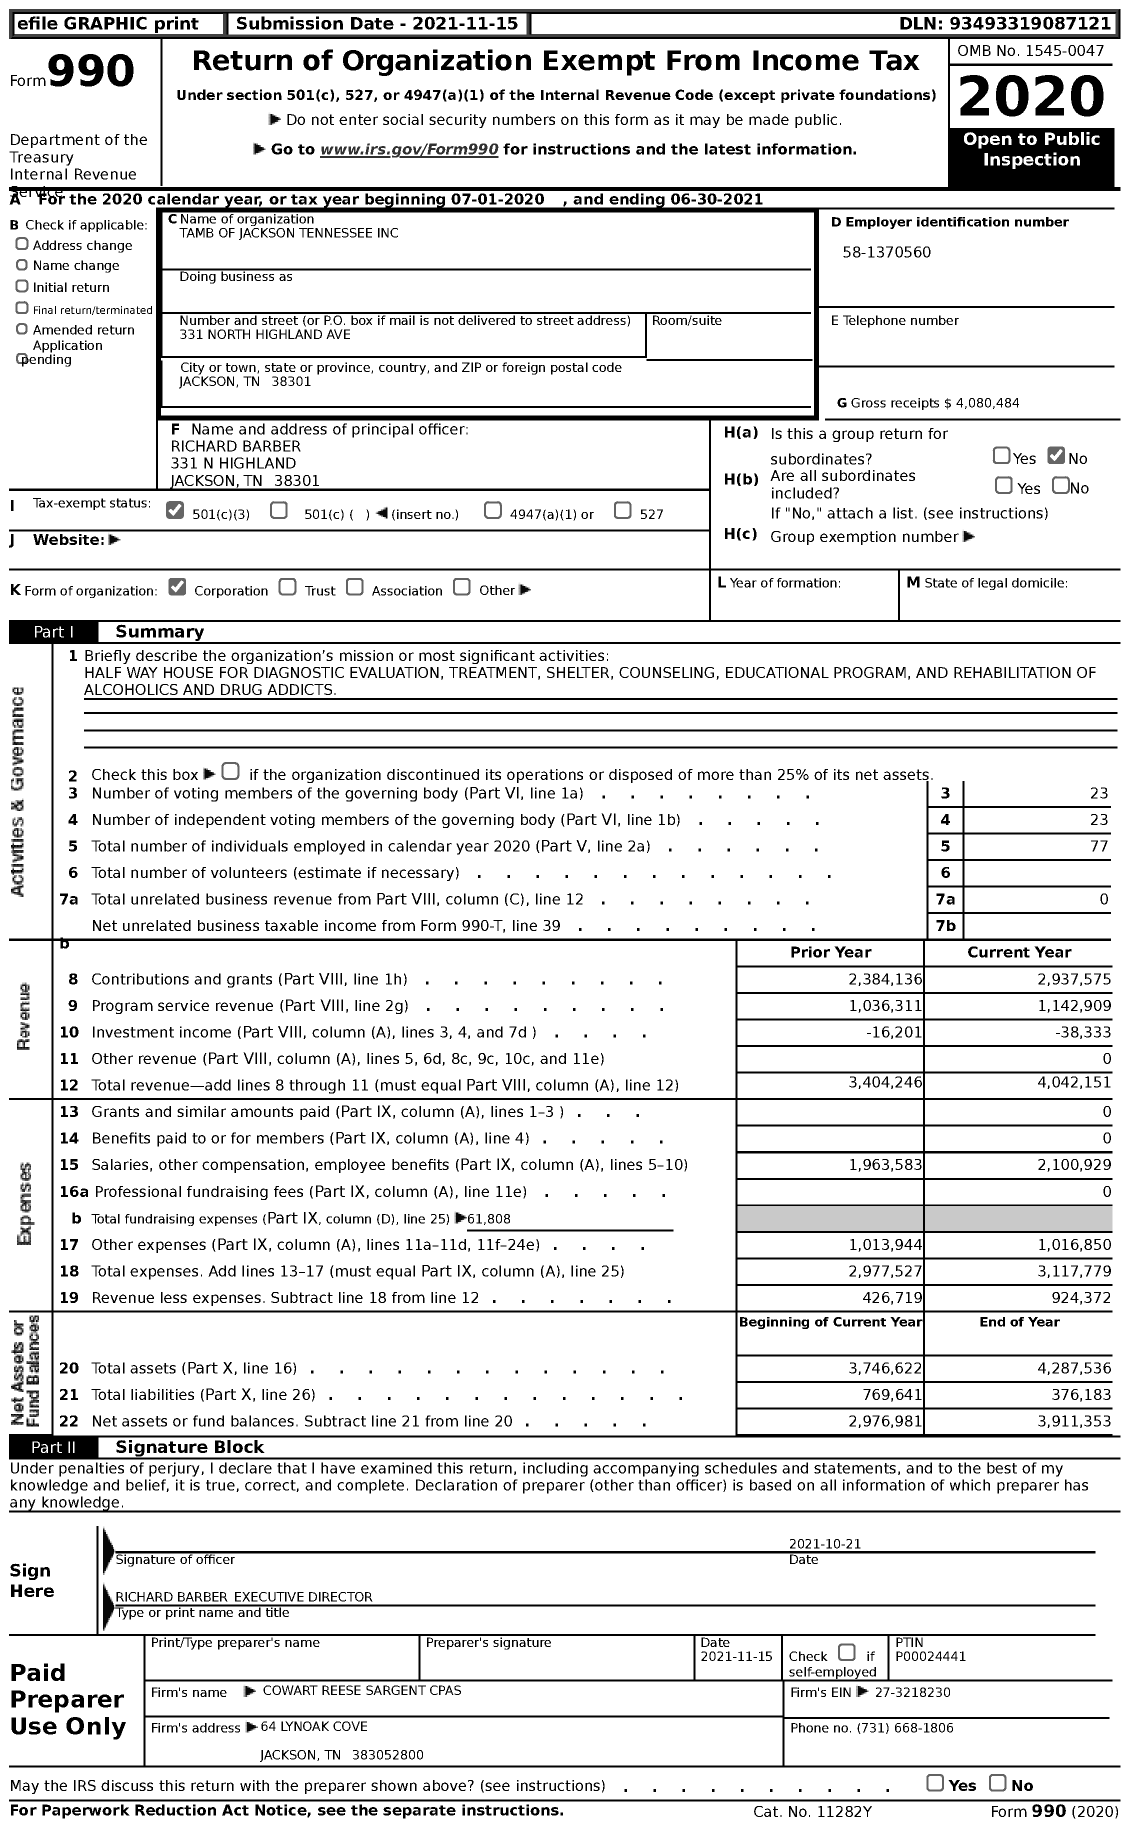 Image of first page of 2020 Form 990 for Tamb of Jackson Tennessee